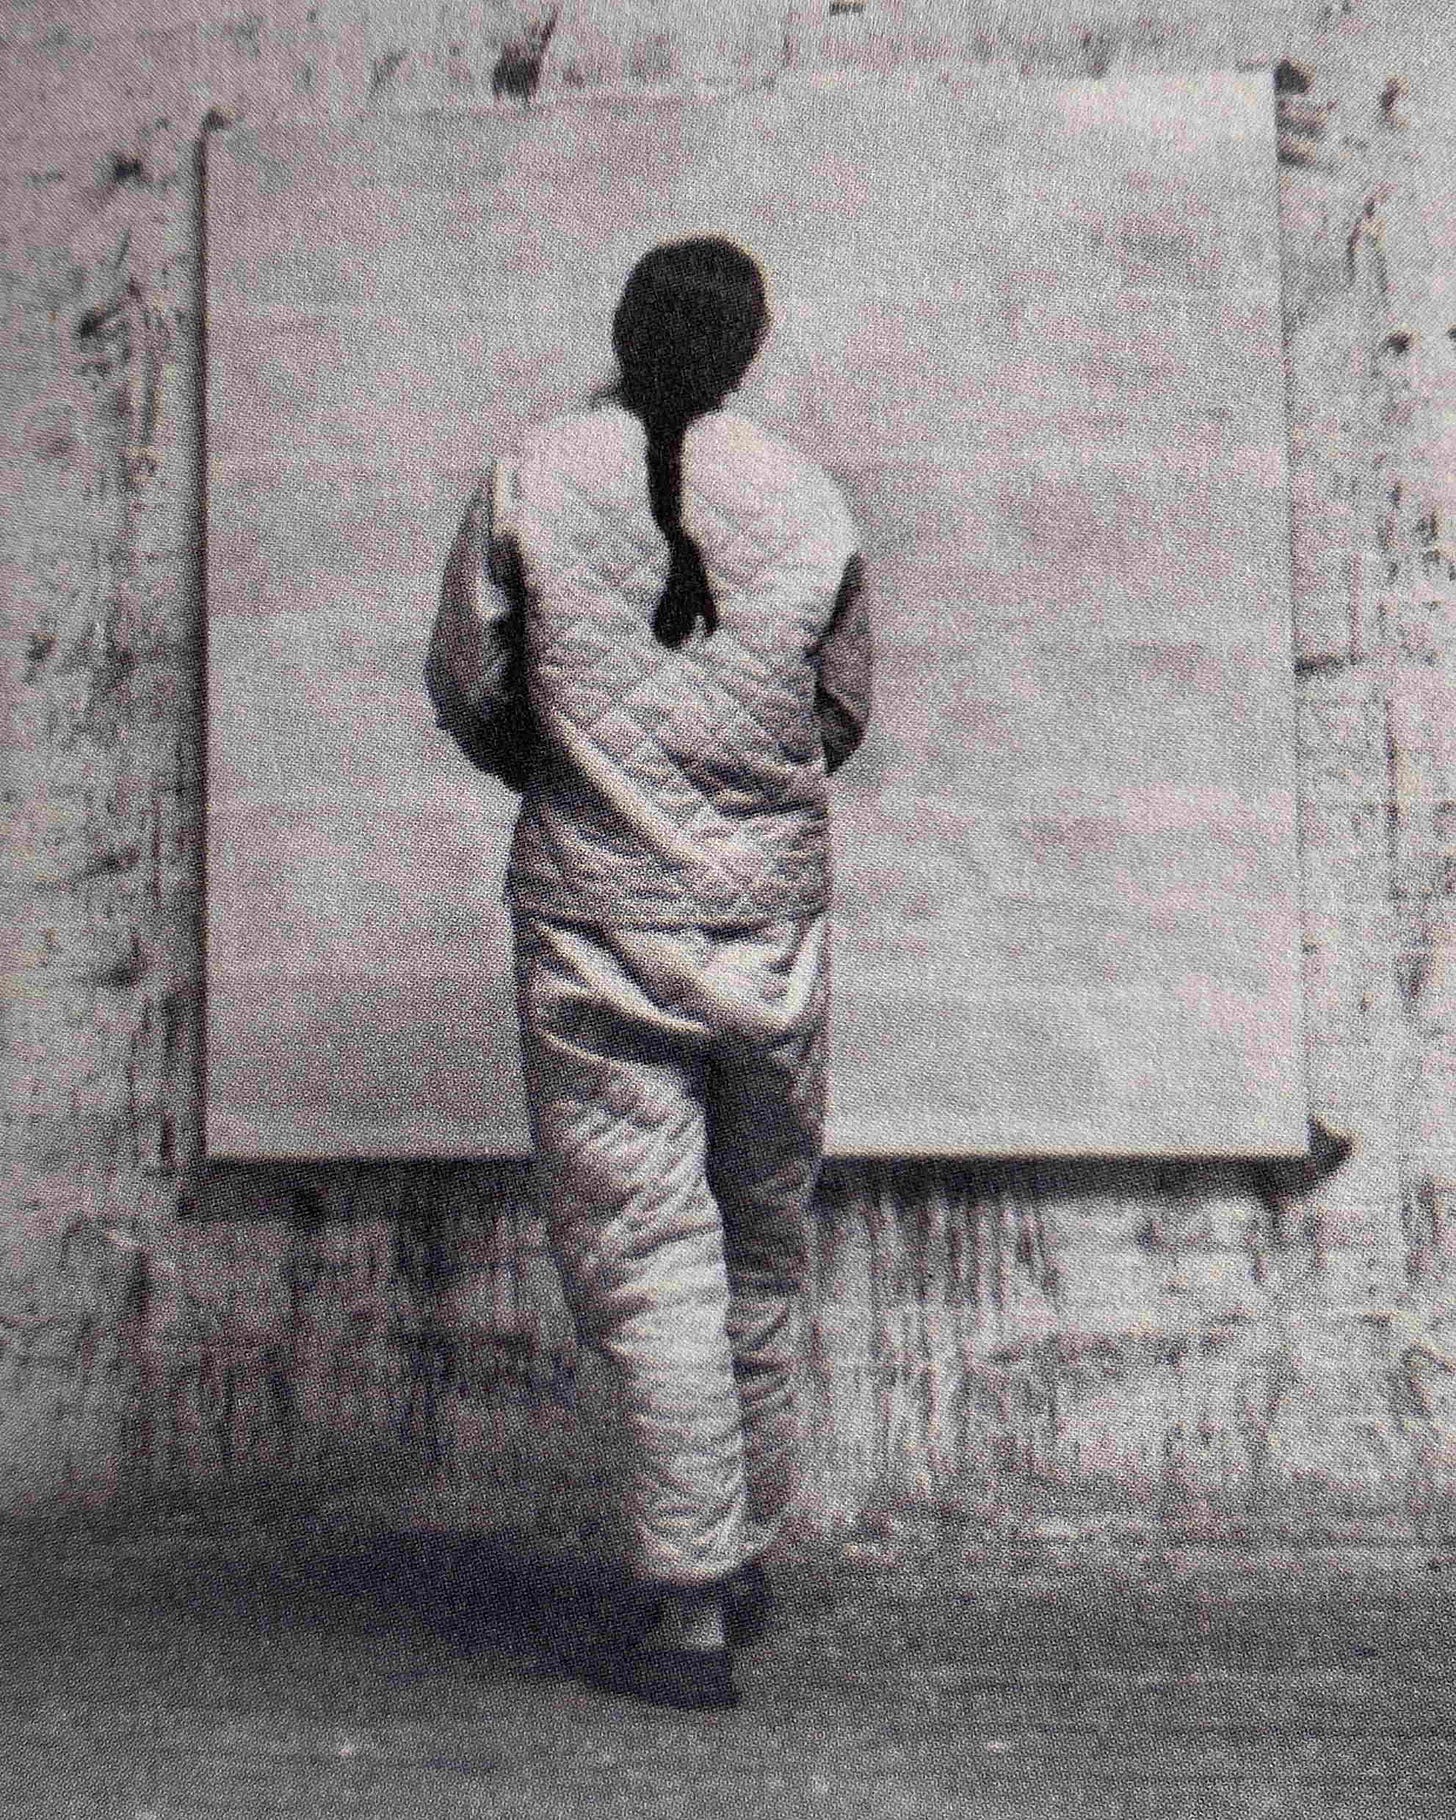 Agnes Martin has her back to us and is working on a big canvas. She's wearing quilted jacket and trousers